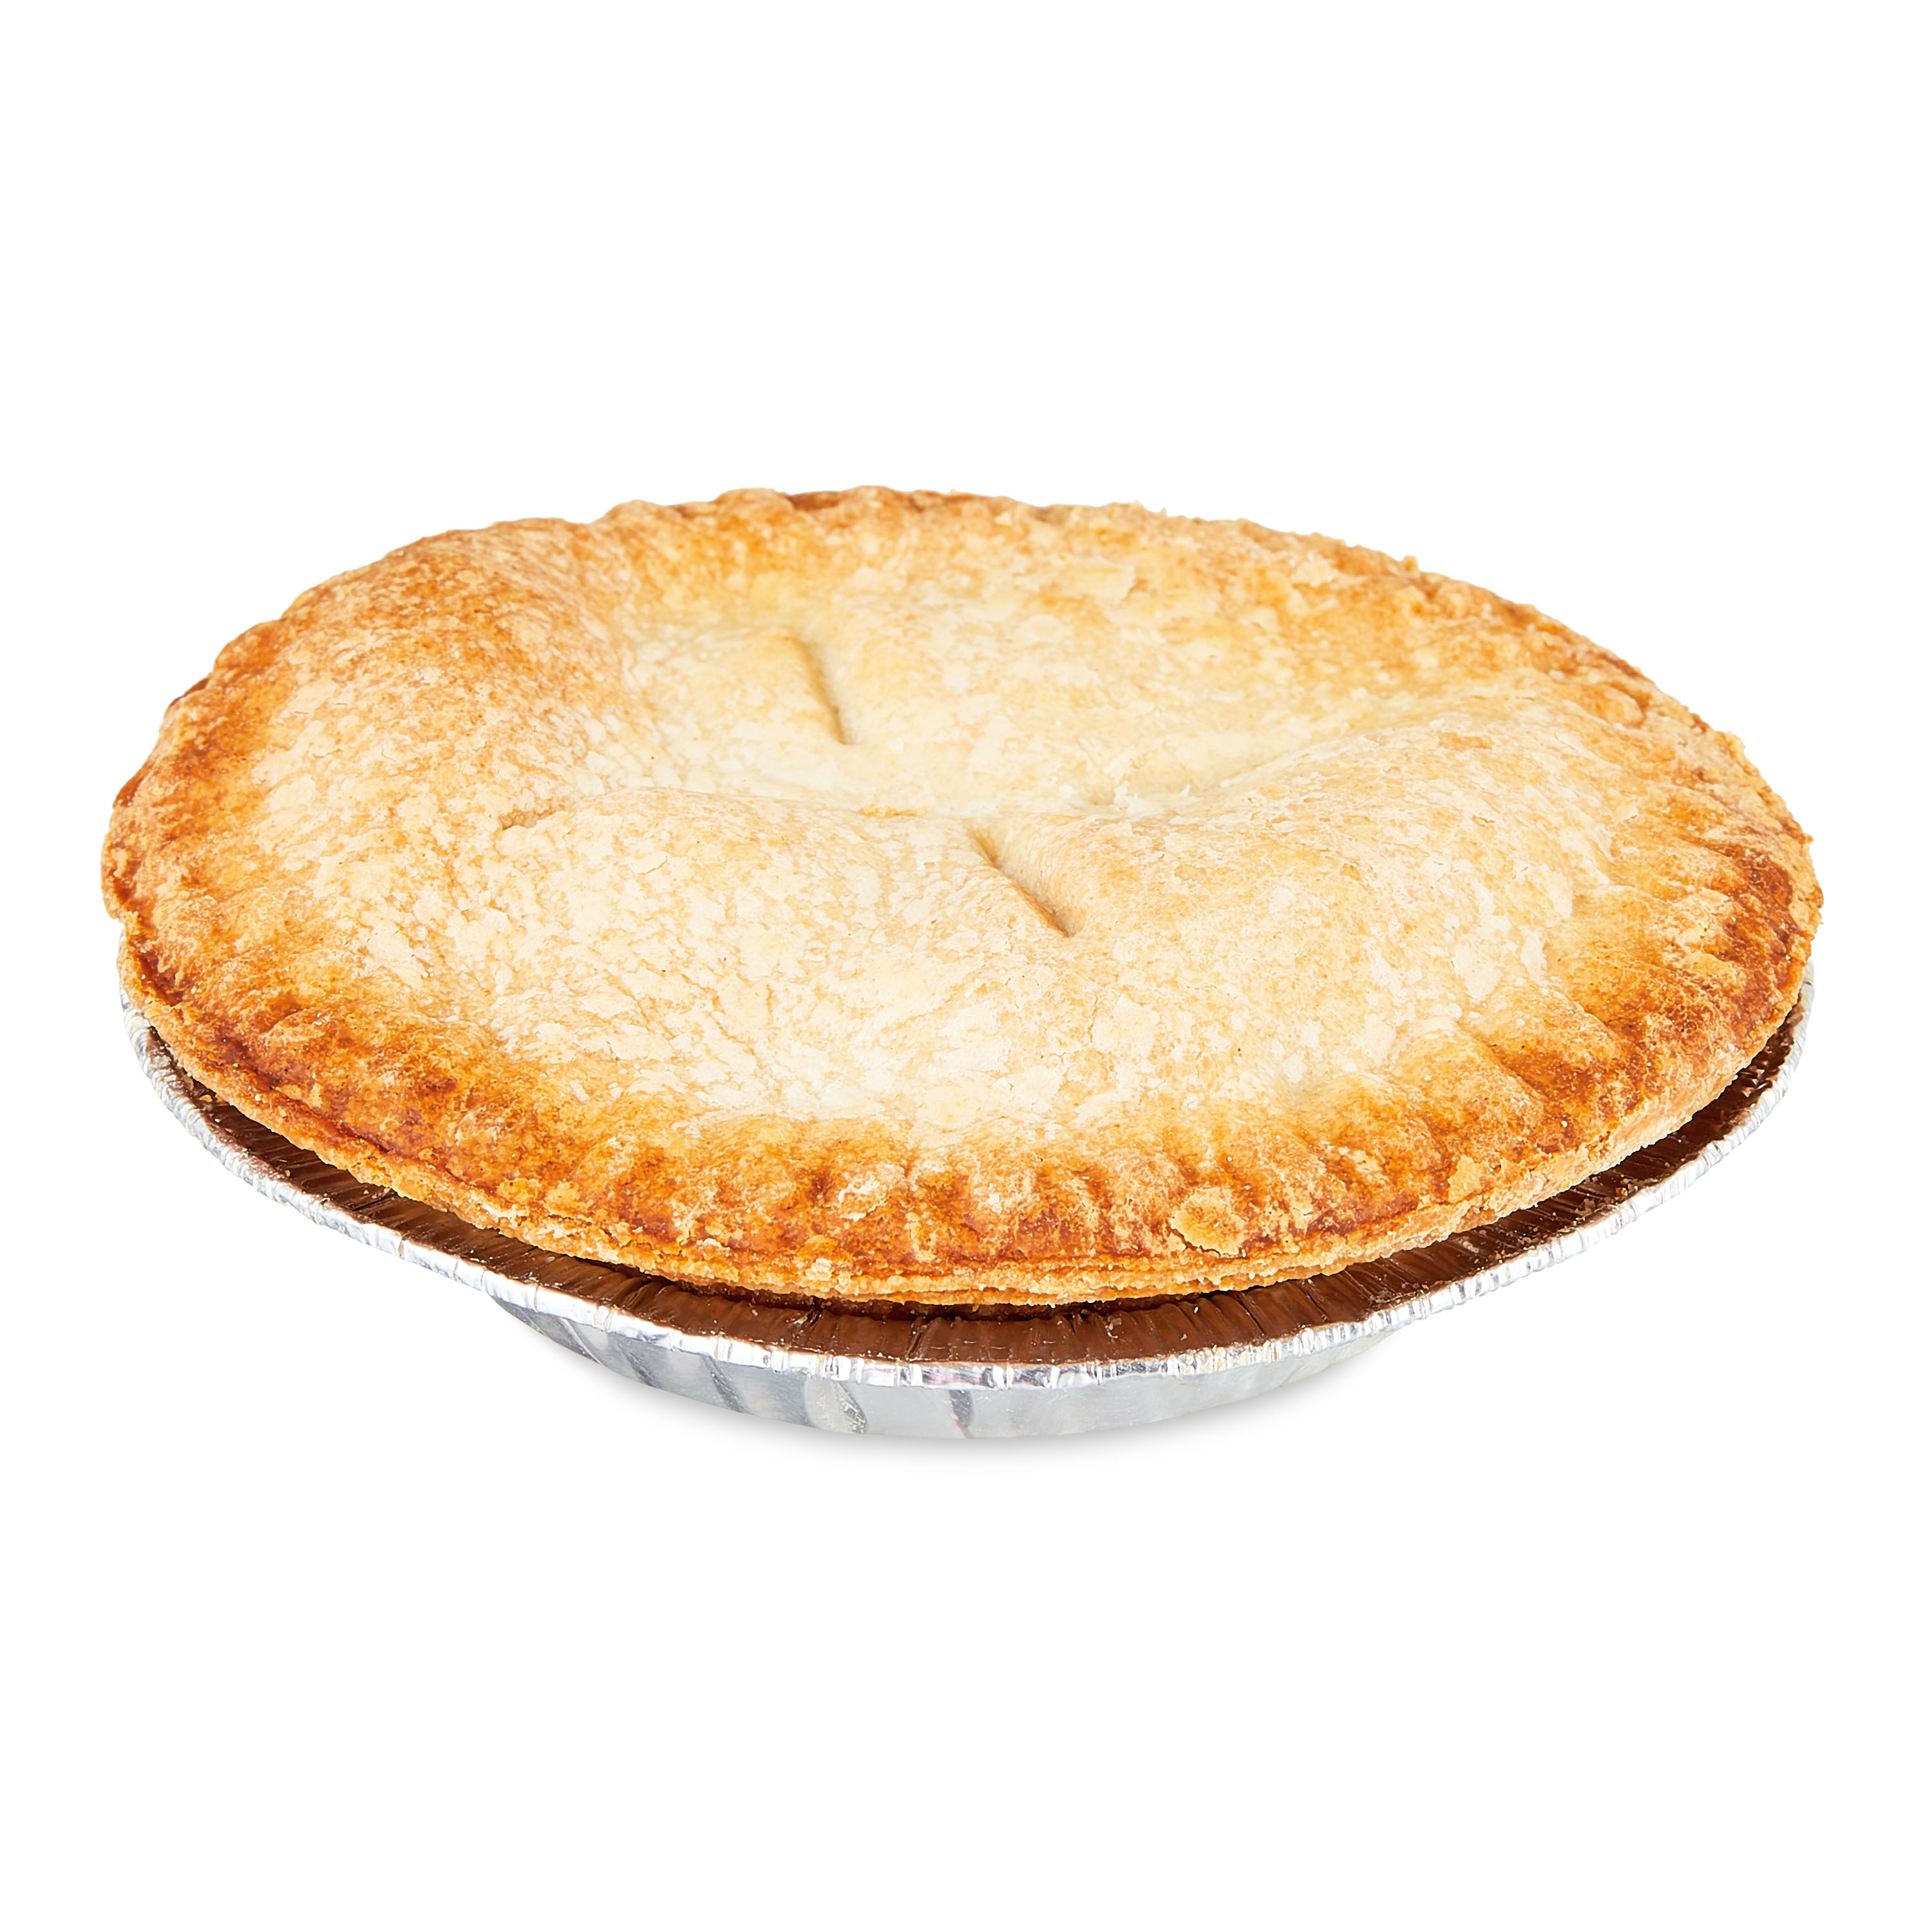 Freshness Guaranteed Apple Pie, 4 in, 3.5 oz - image 1 of 9